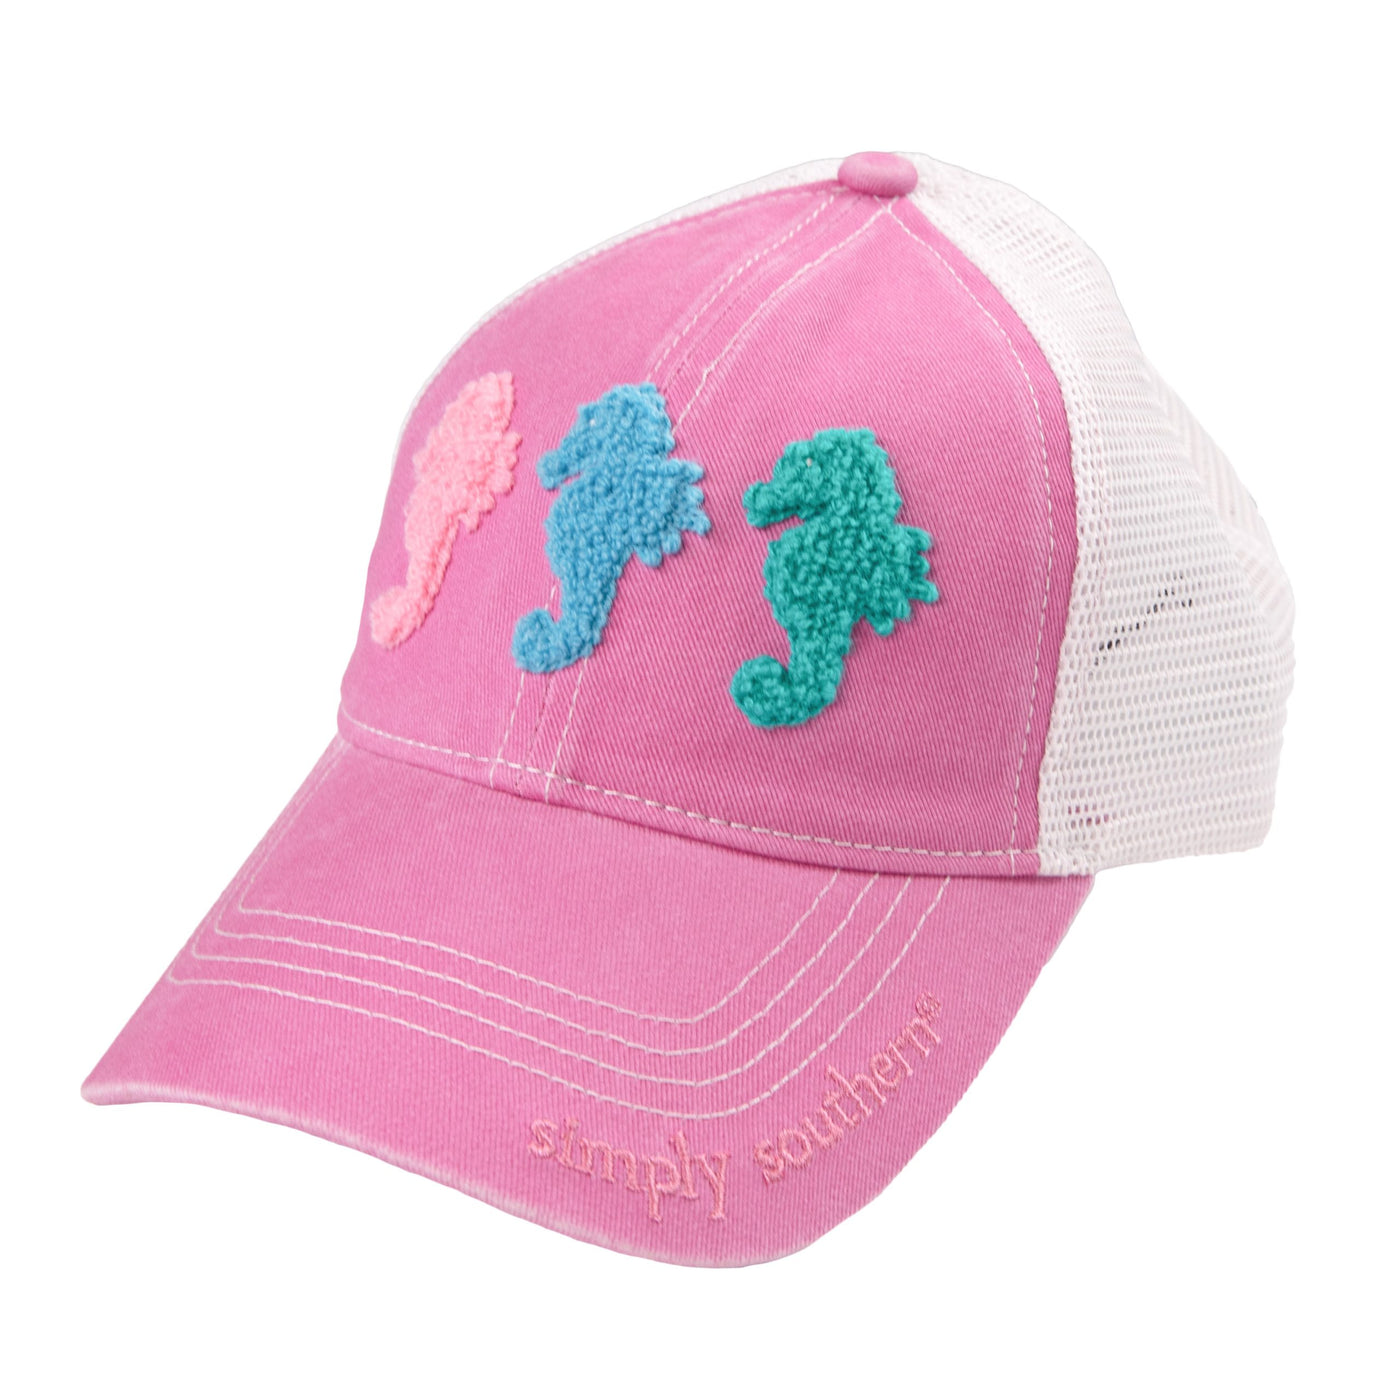 Seahorse Hat by Simply Southern